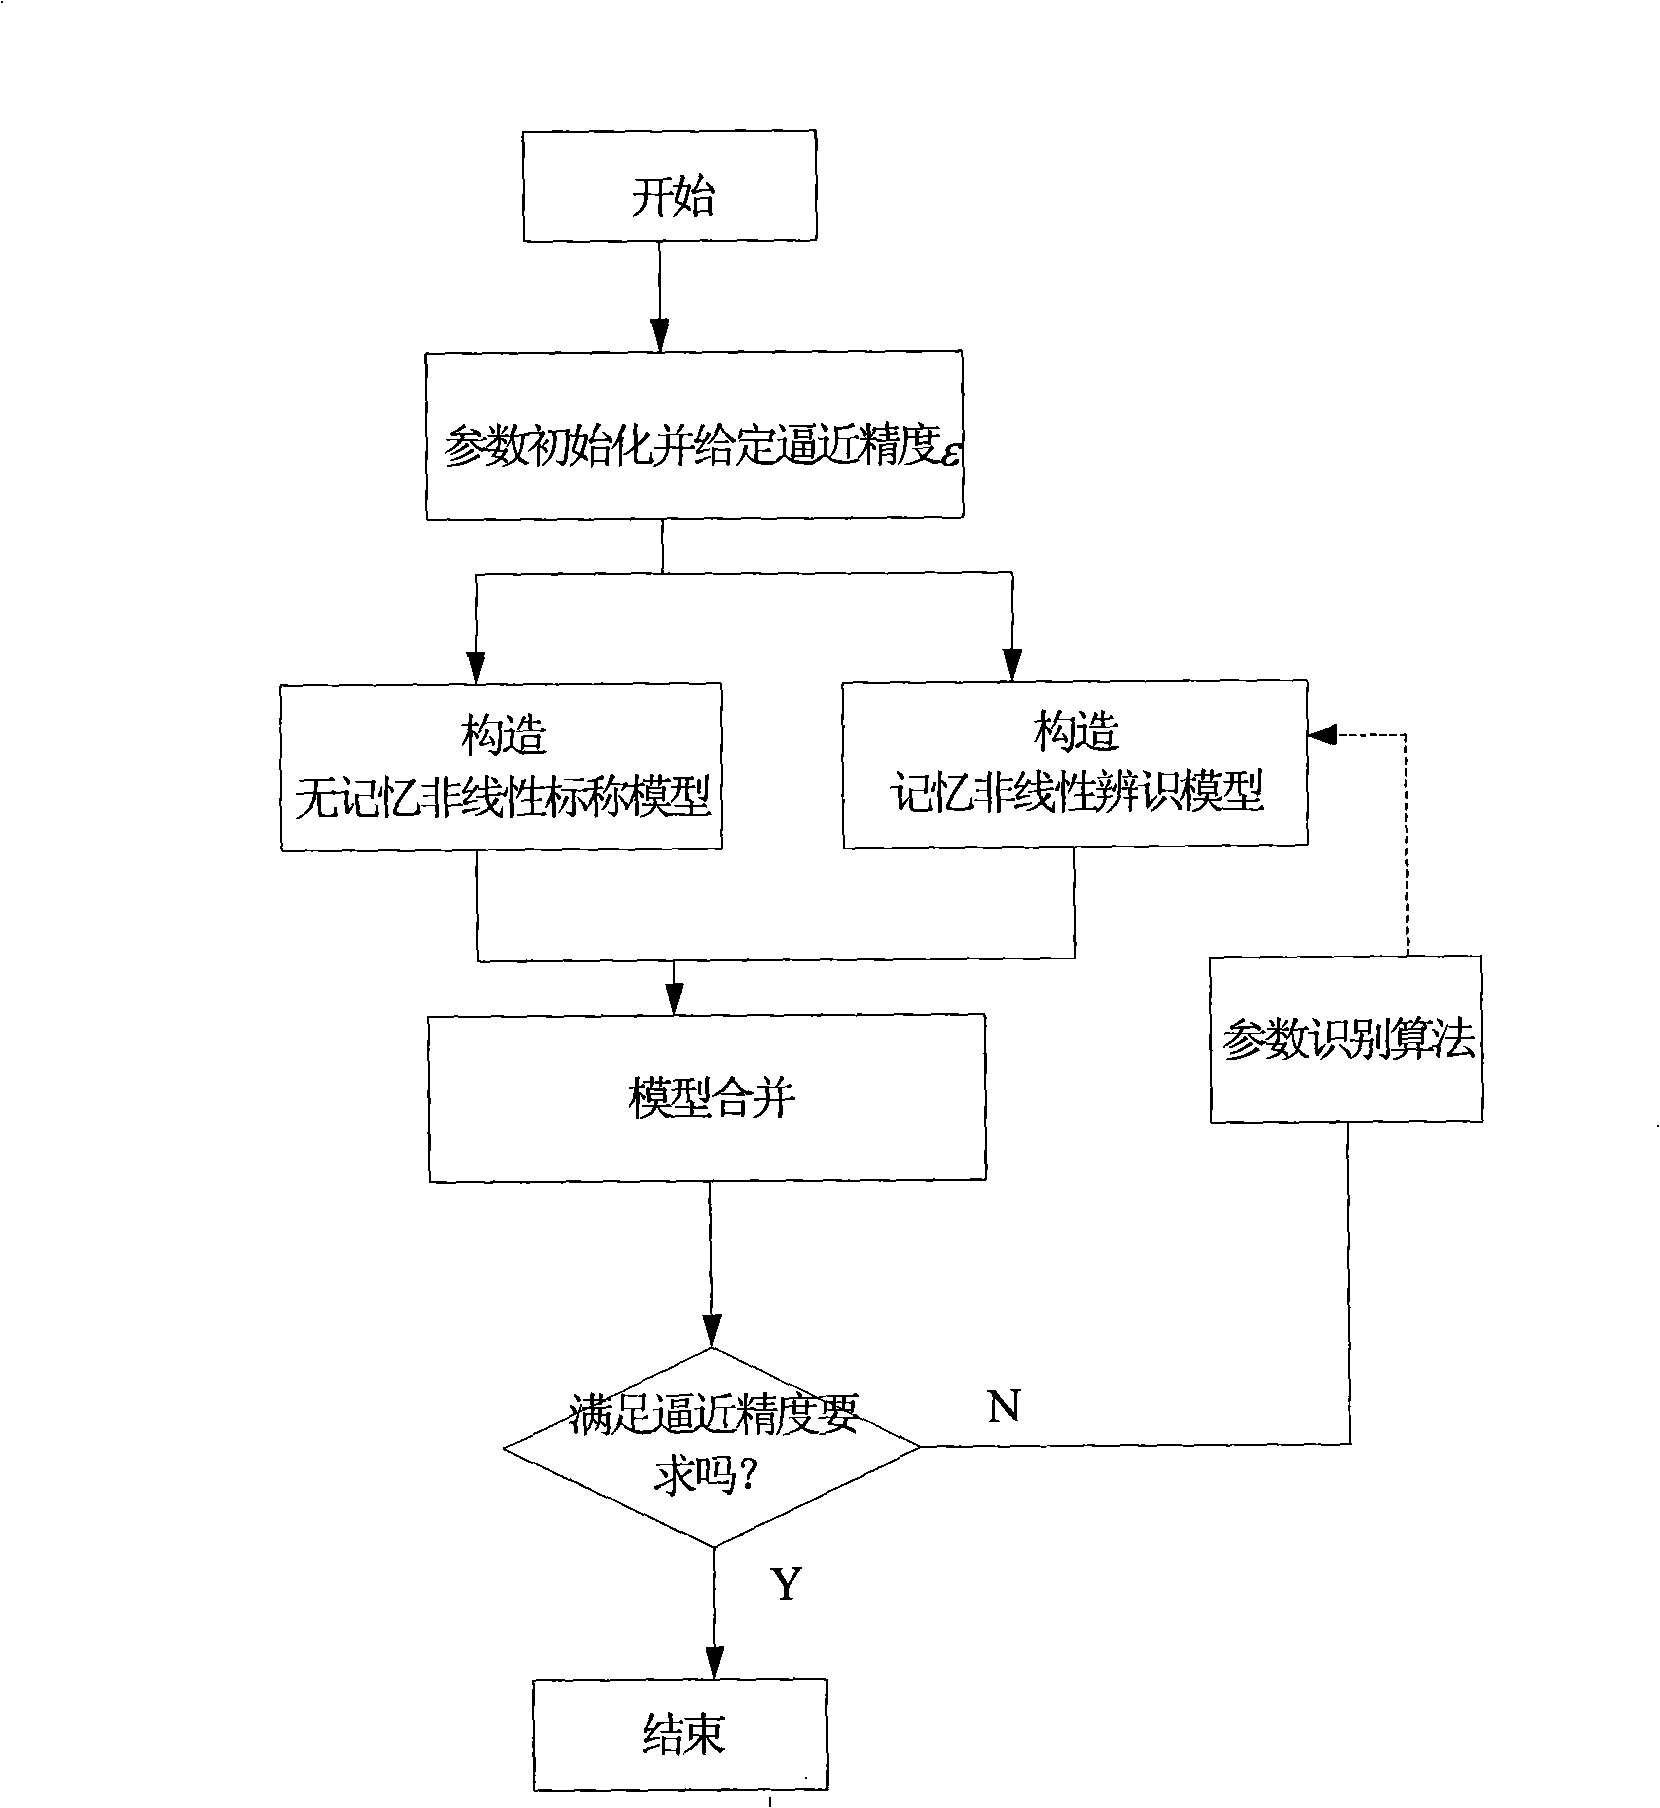 Method for modeling wideband radio-frequency power amplifier